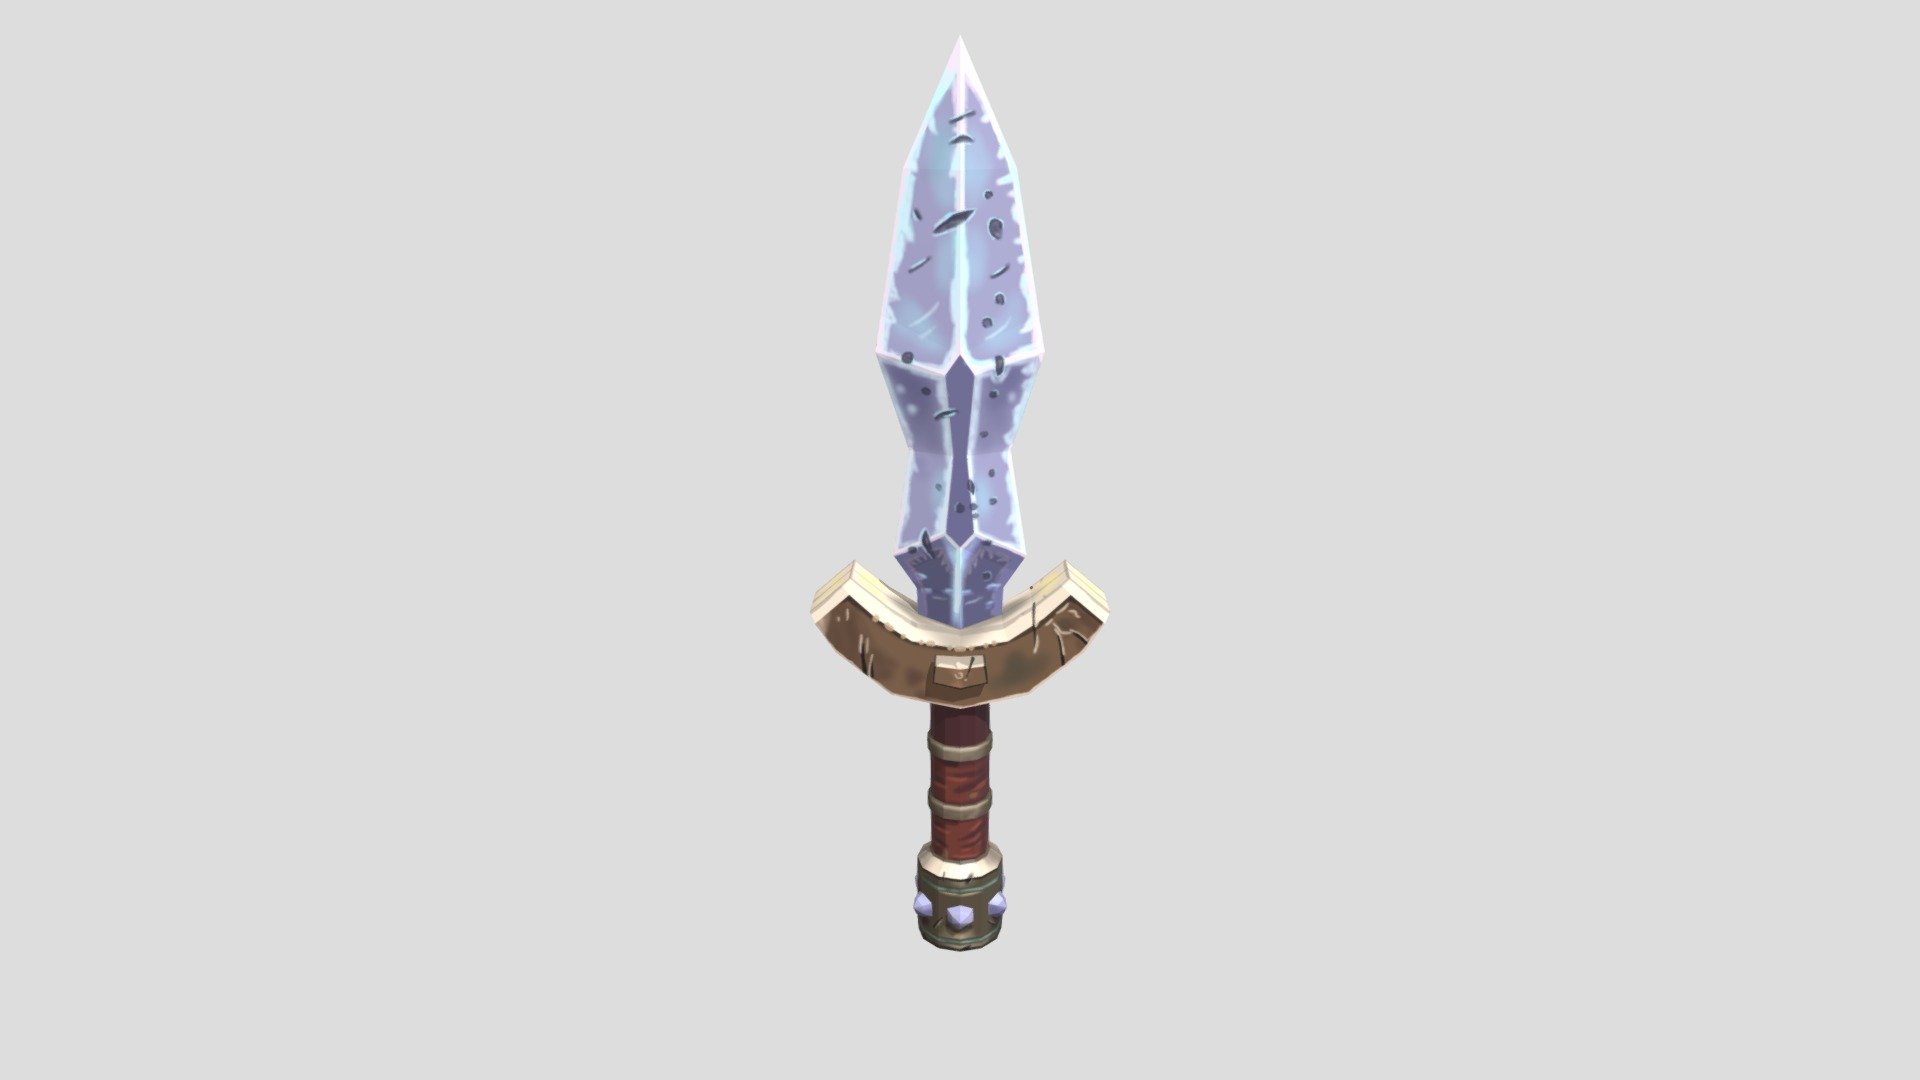 I'm trying to learn texture painting in blender. This is the tutorial I followed: https://www.youtube.com/watch?v=jR7Axe2hbz8 - Dagger - Download Free 3D model by kirirato 3d model